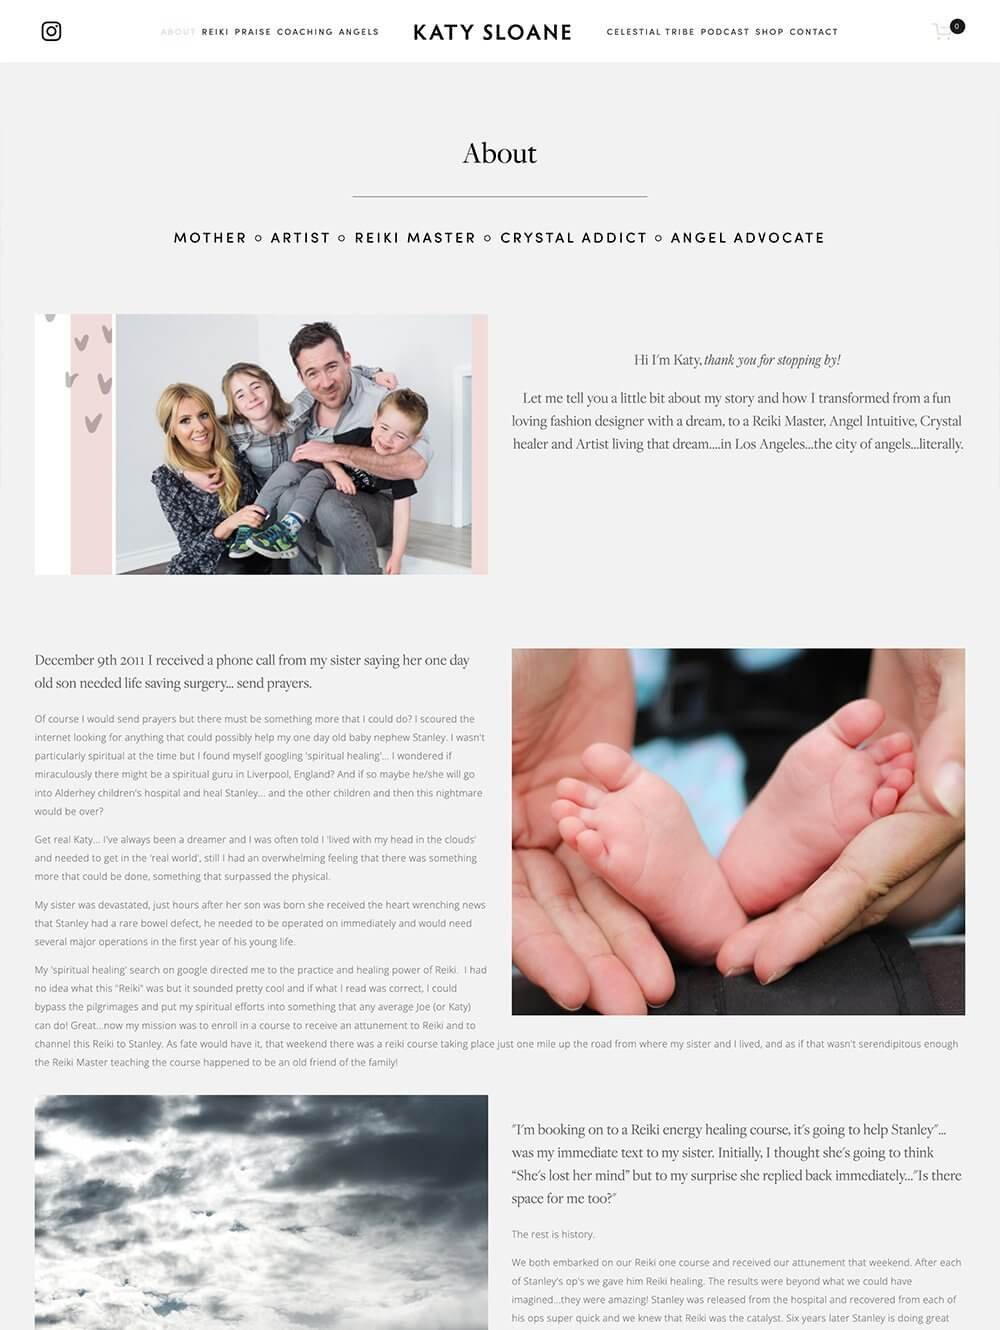 professional brand and website design helping big thinking professional women upgrade their website